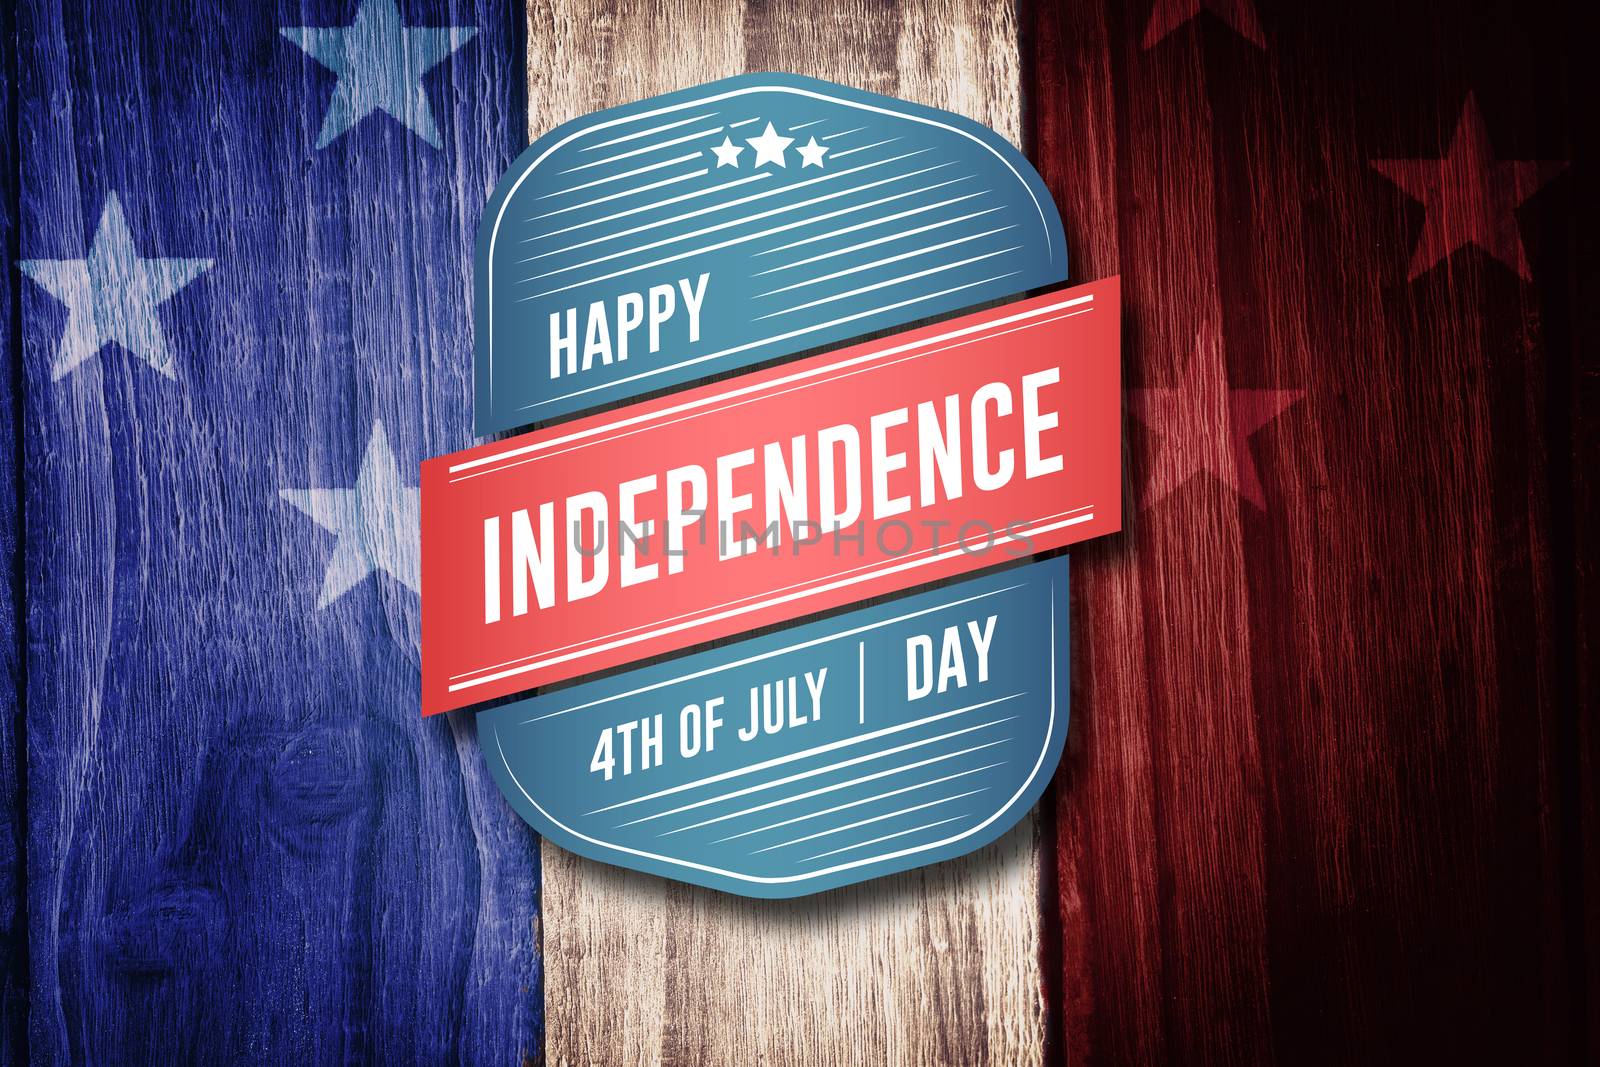 Independence day graphic against wooden table